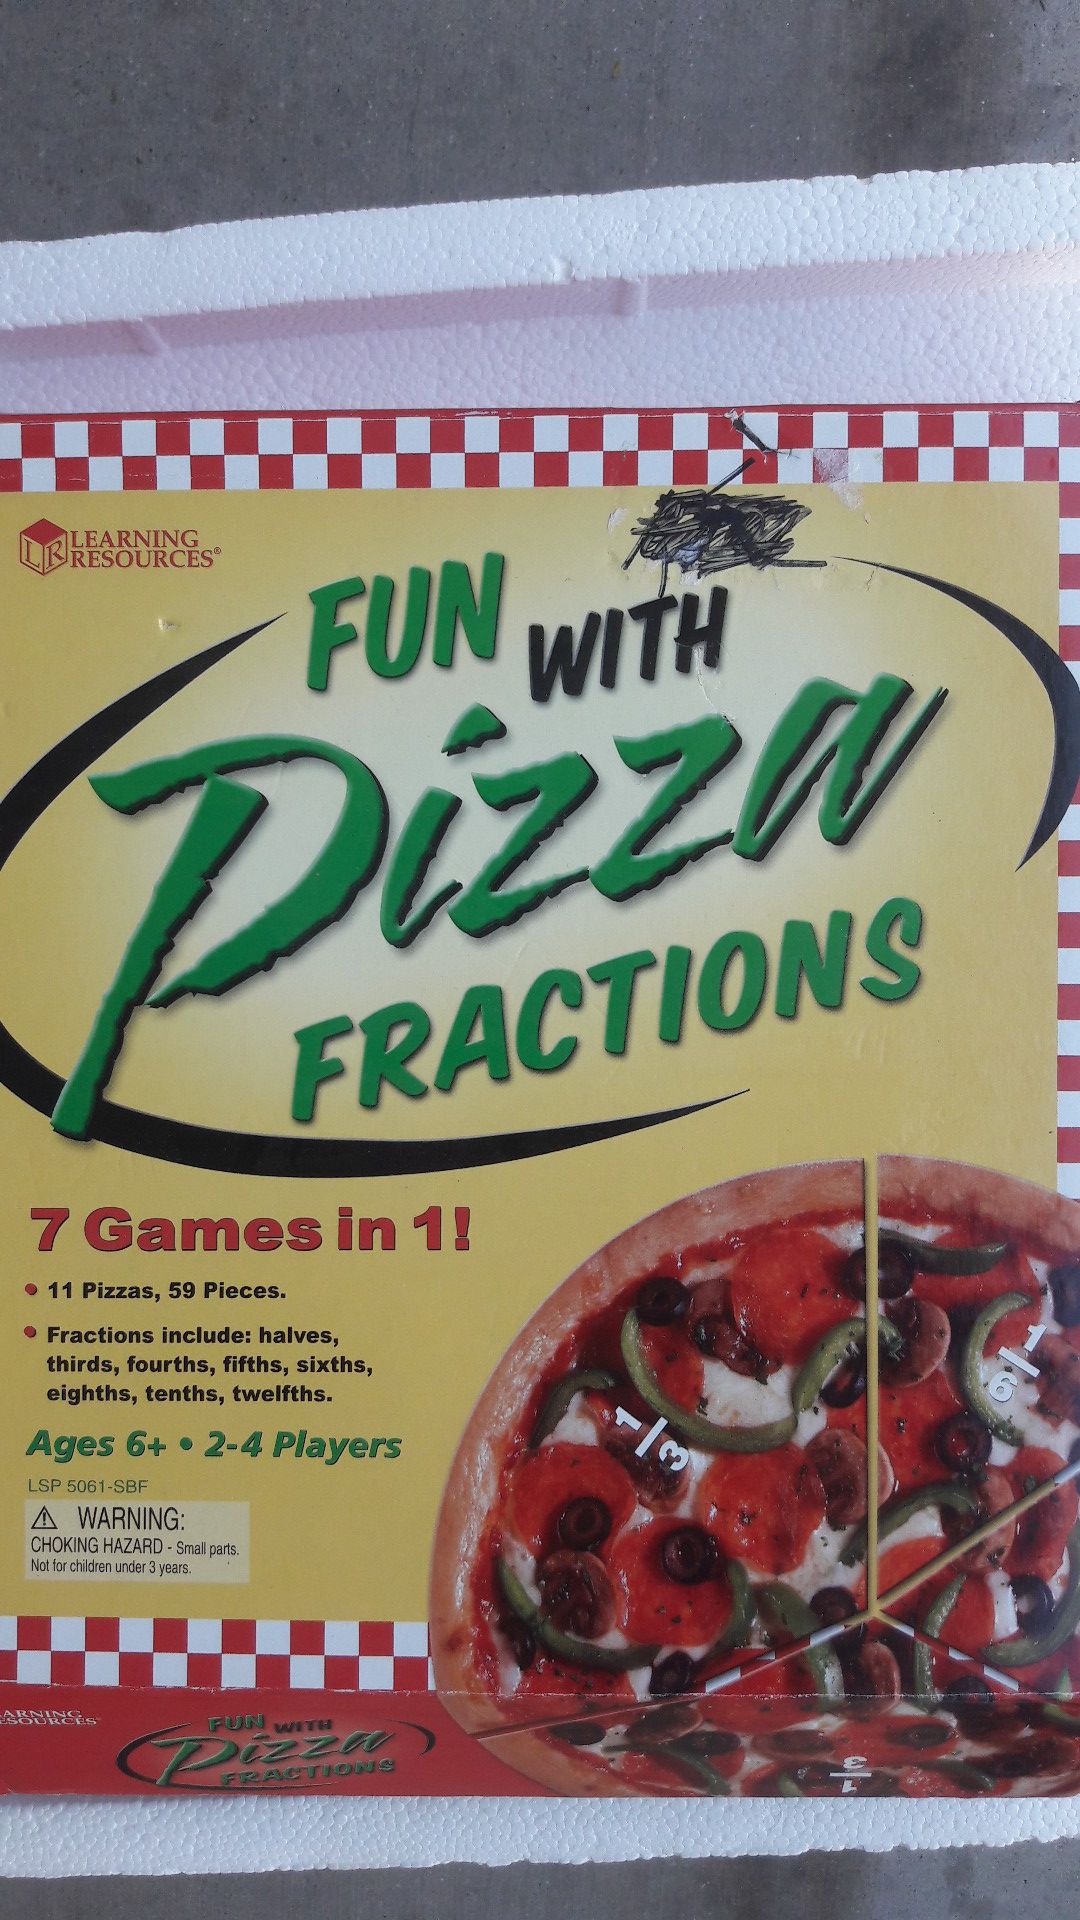 Fun With Pizza Fractions. My kid learn fractions playing this game.